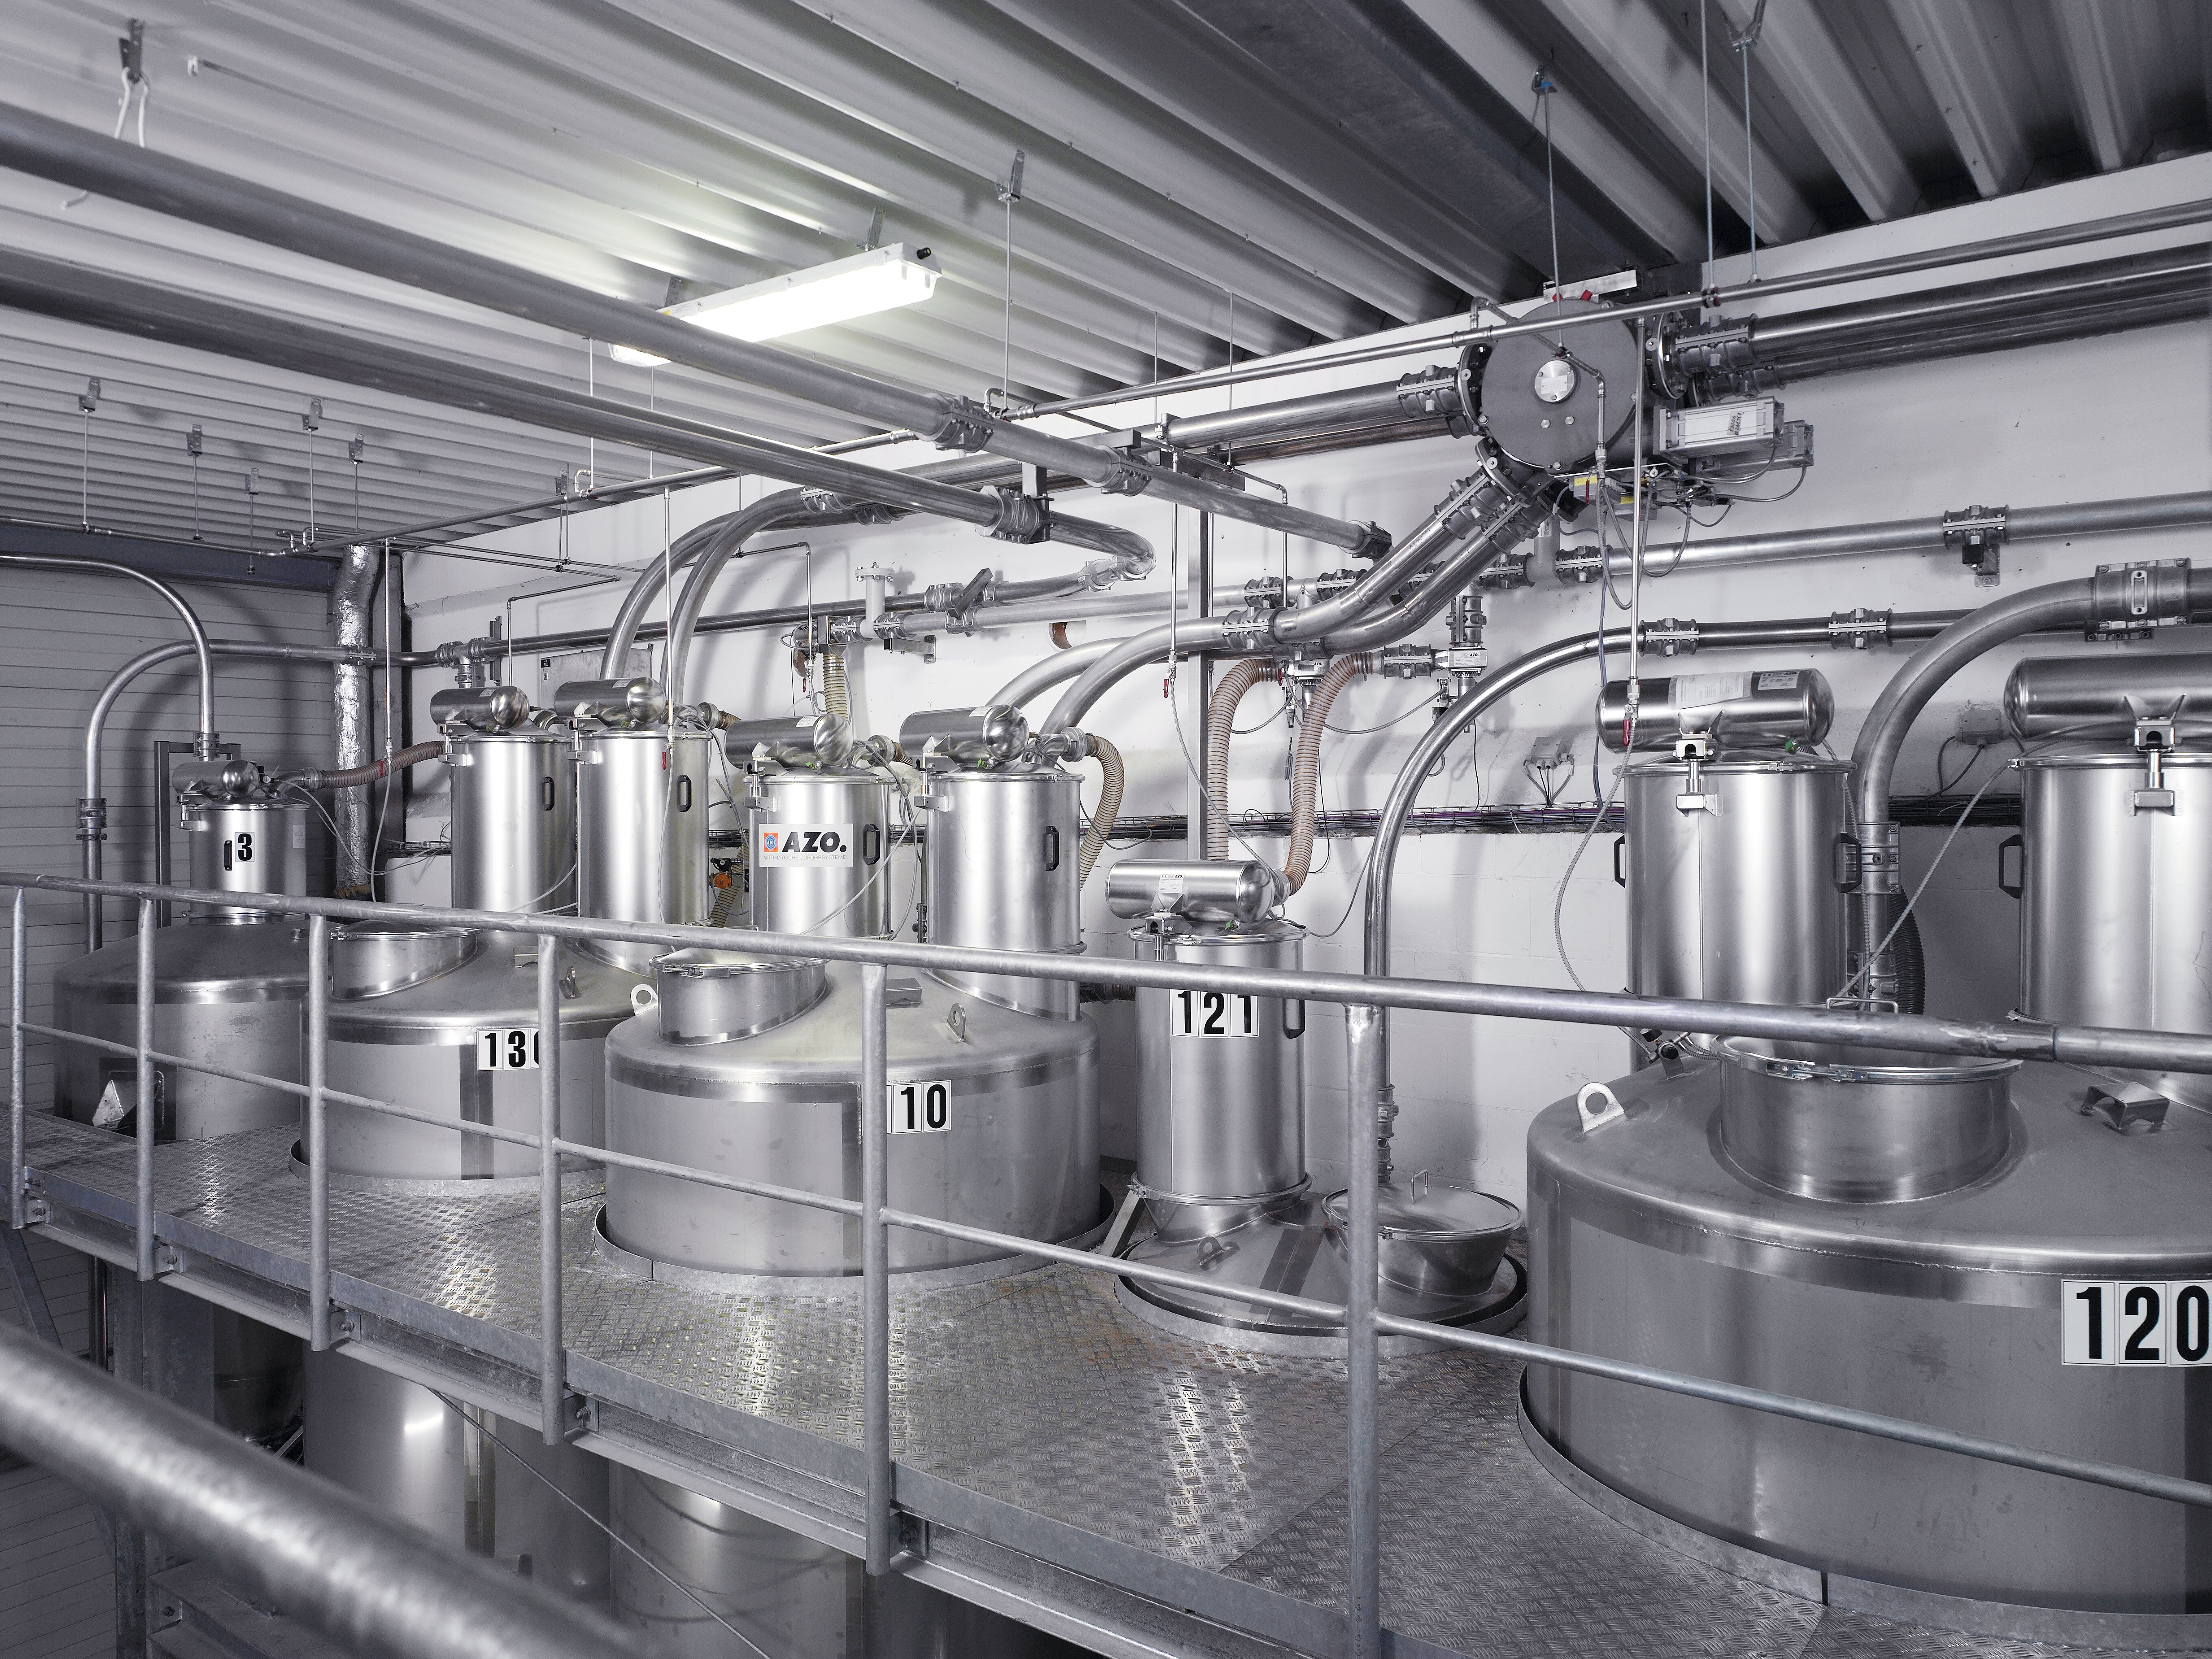 Pneumatic conveying systems